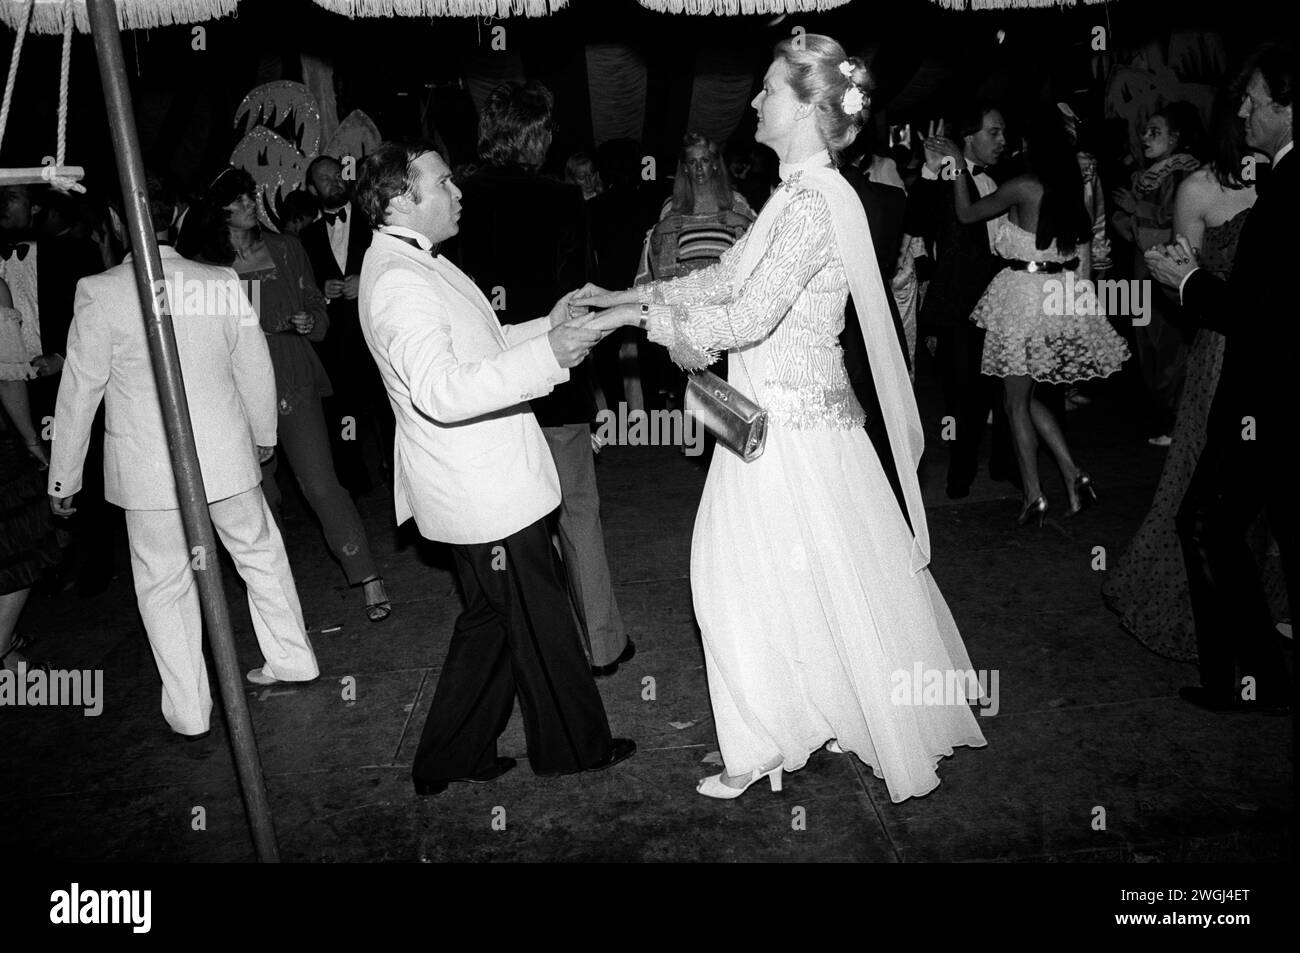 Westminster, London, England September 1981. Wealthy middle class dance the night away at the annual Berkeley Square Ball in Westminster London. 1980s UK. HOMER SYKES Stock Photo